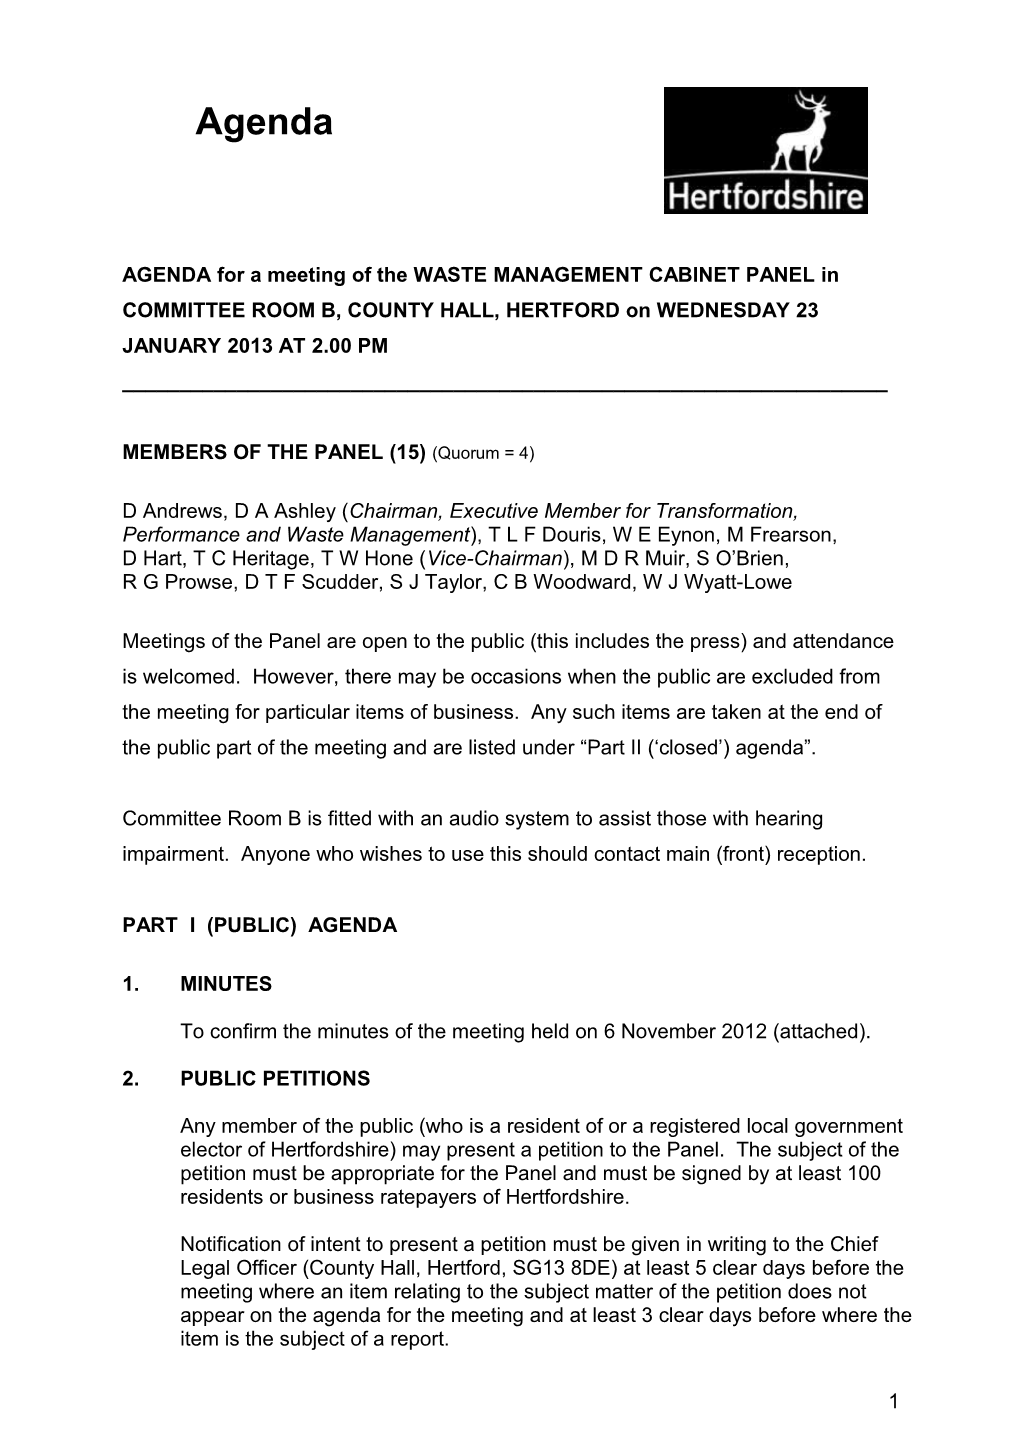 Agenda for a Meeting of the Waste Management Cabinet Panel Thursday 5 July 2012 at 2Pm